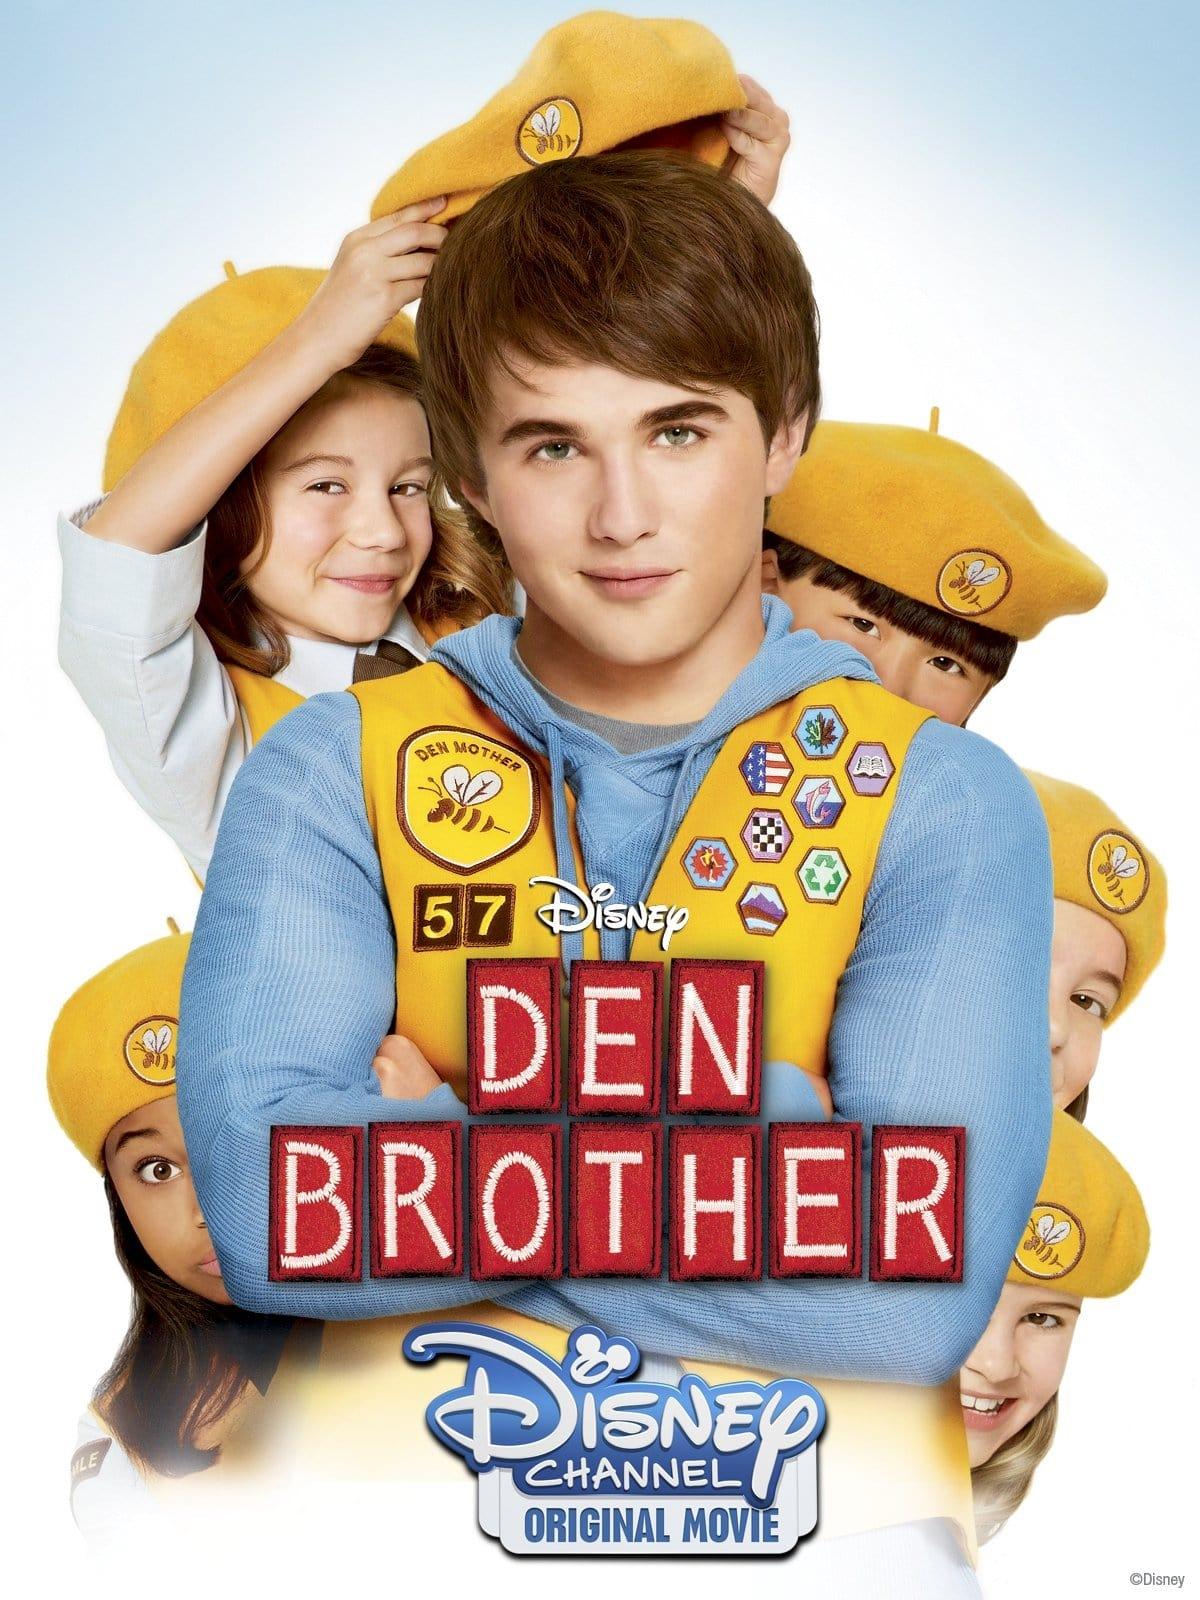 Den Brother poster